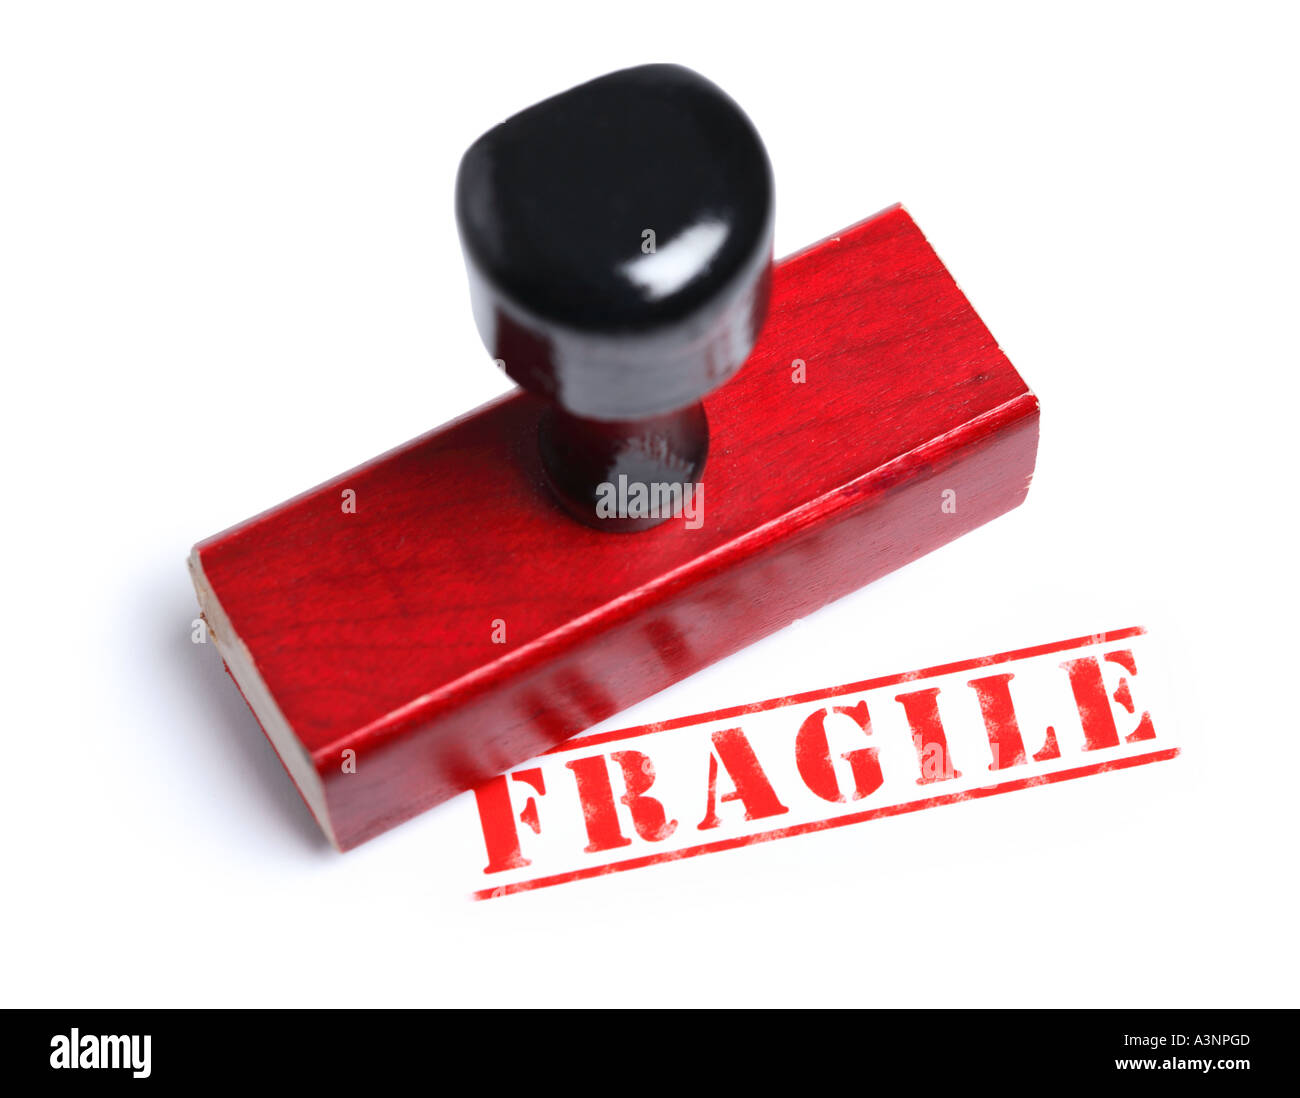 Fragile Rubber stamp Stock Photo